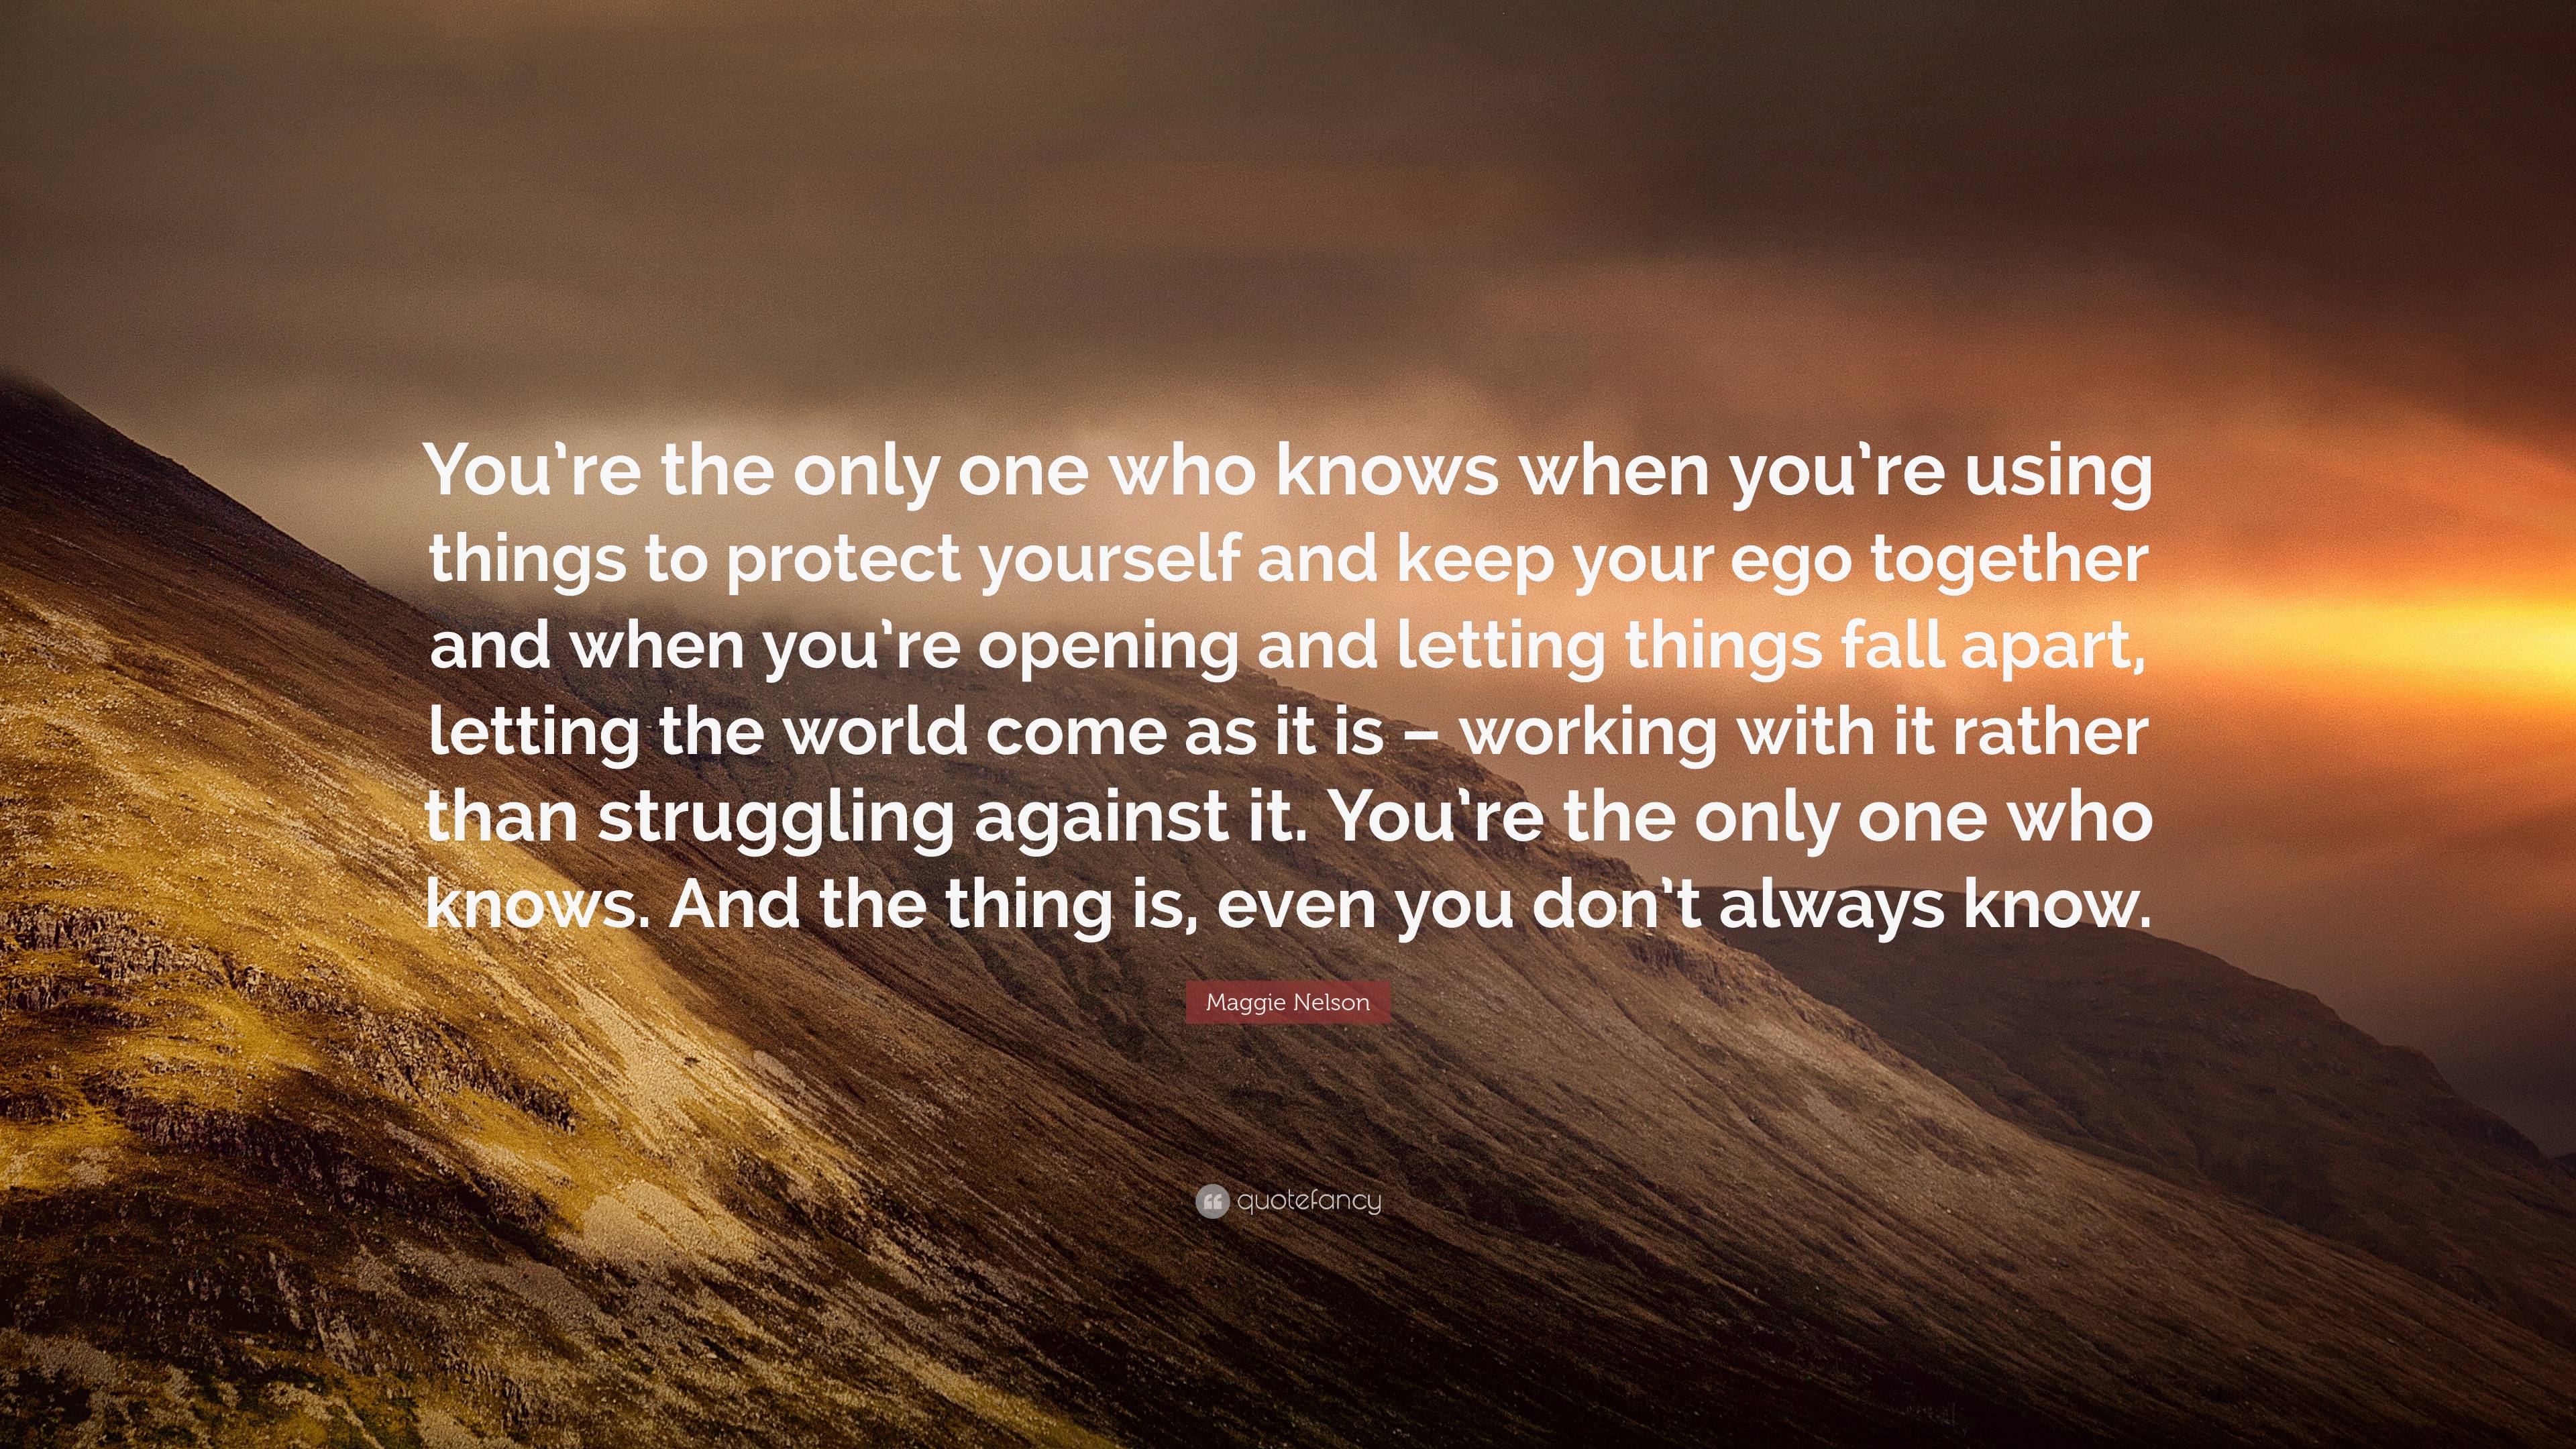 Maggie Nelson Quote: “You’re the only one who knows when you’re using ...